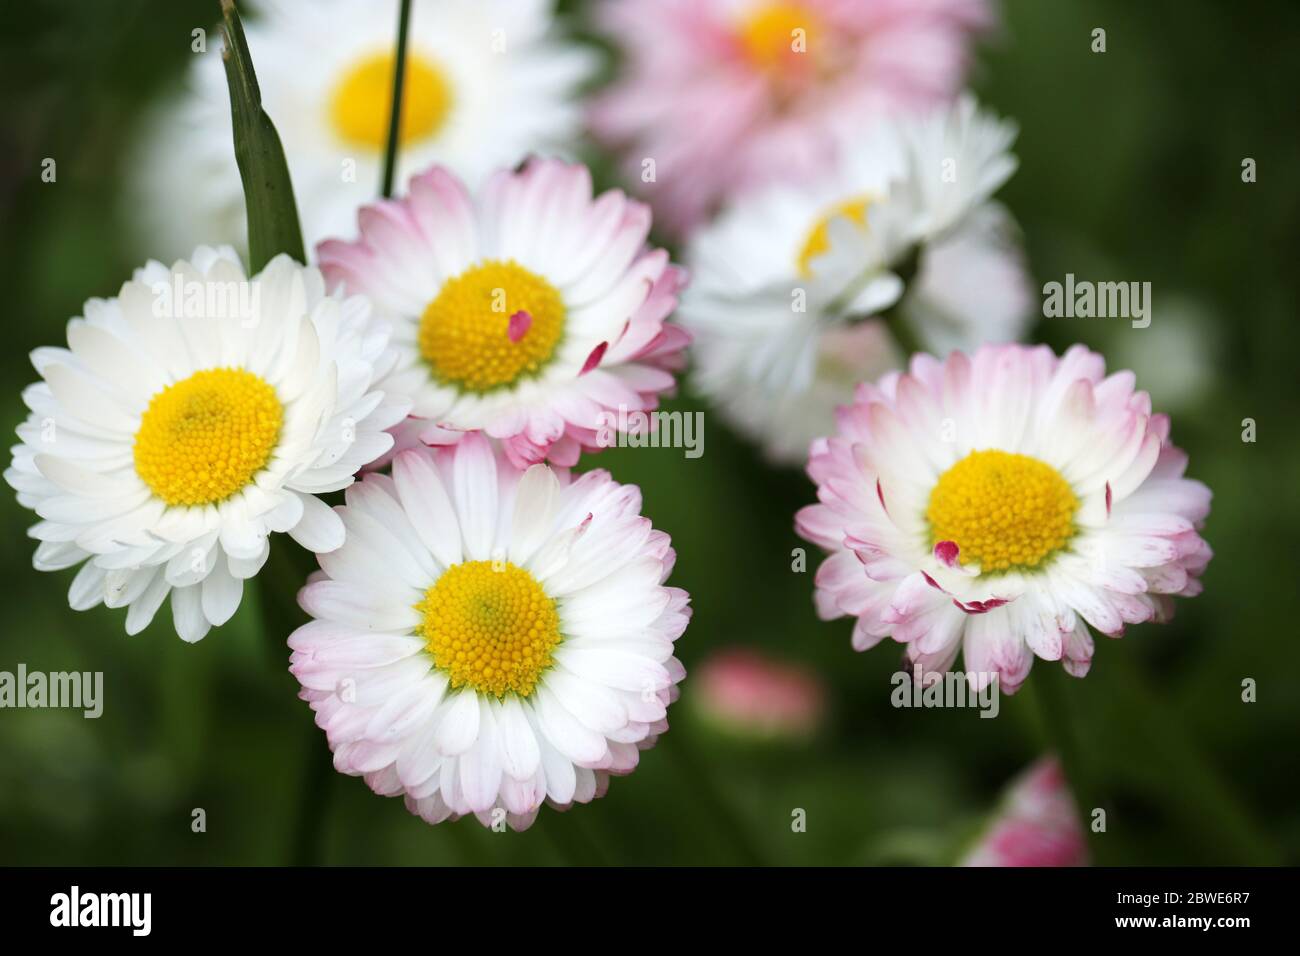 White and pink daisy flowers in green grass, floral background. Marguerites on flowerbed in summer, beauty of nature Stock Photo